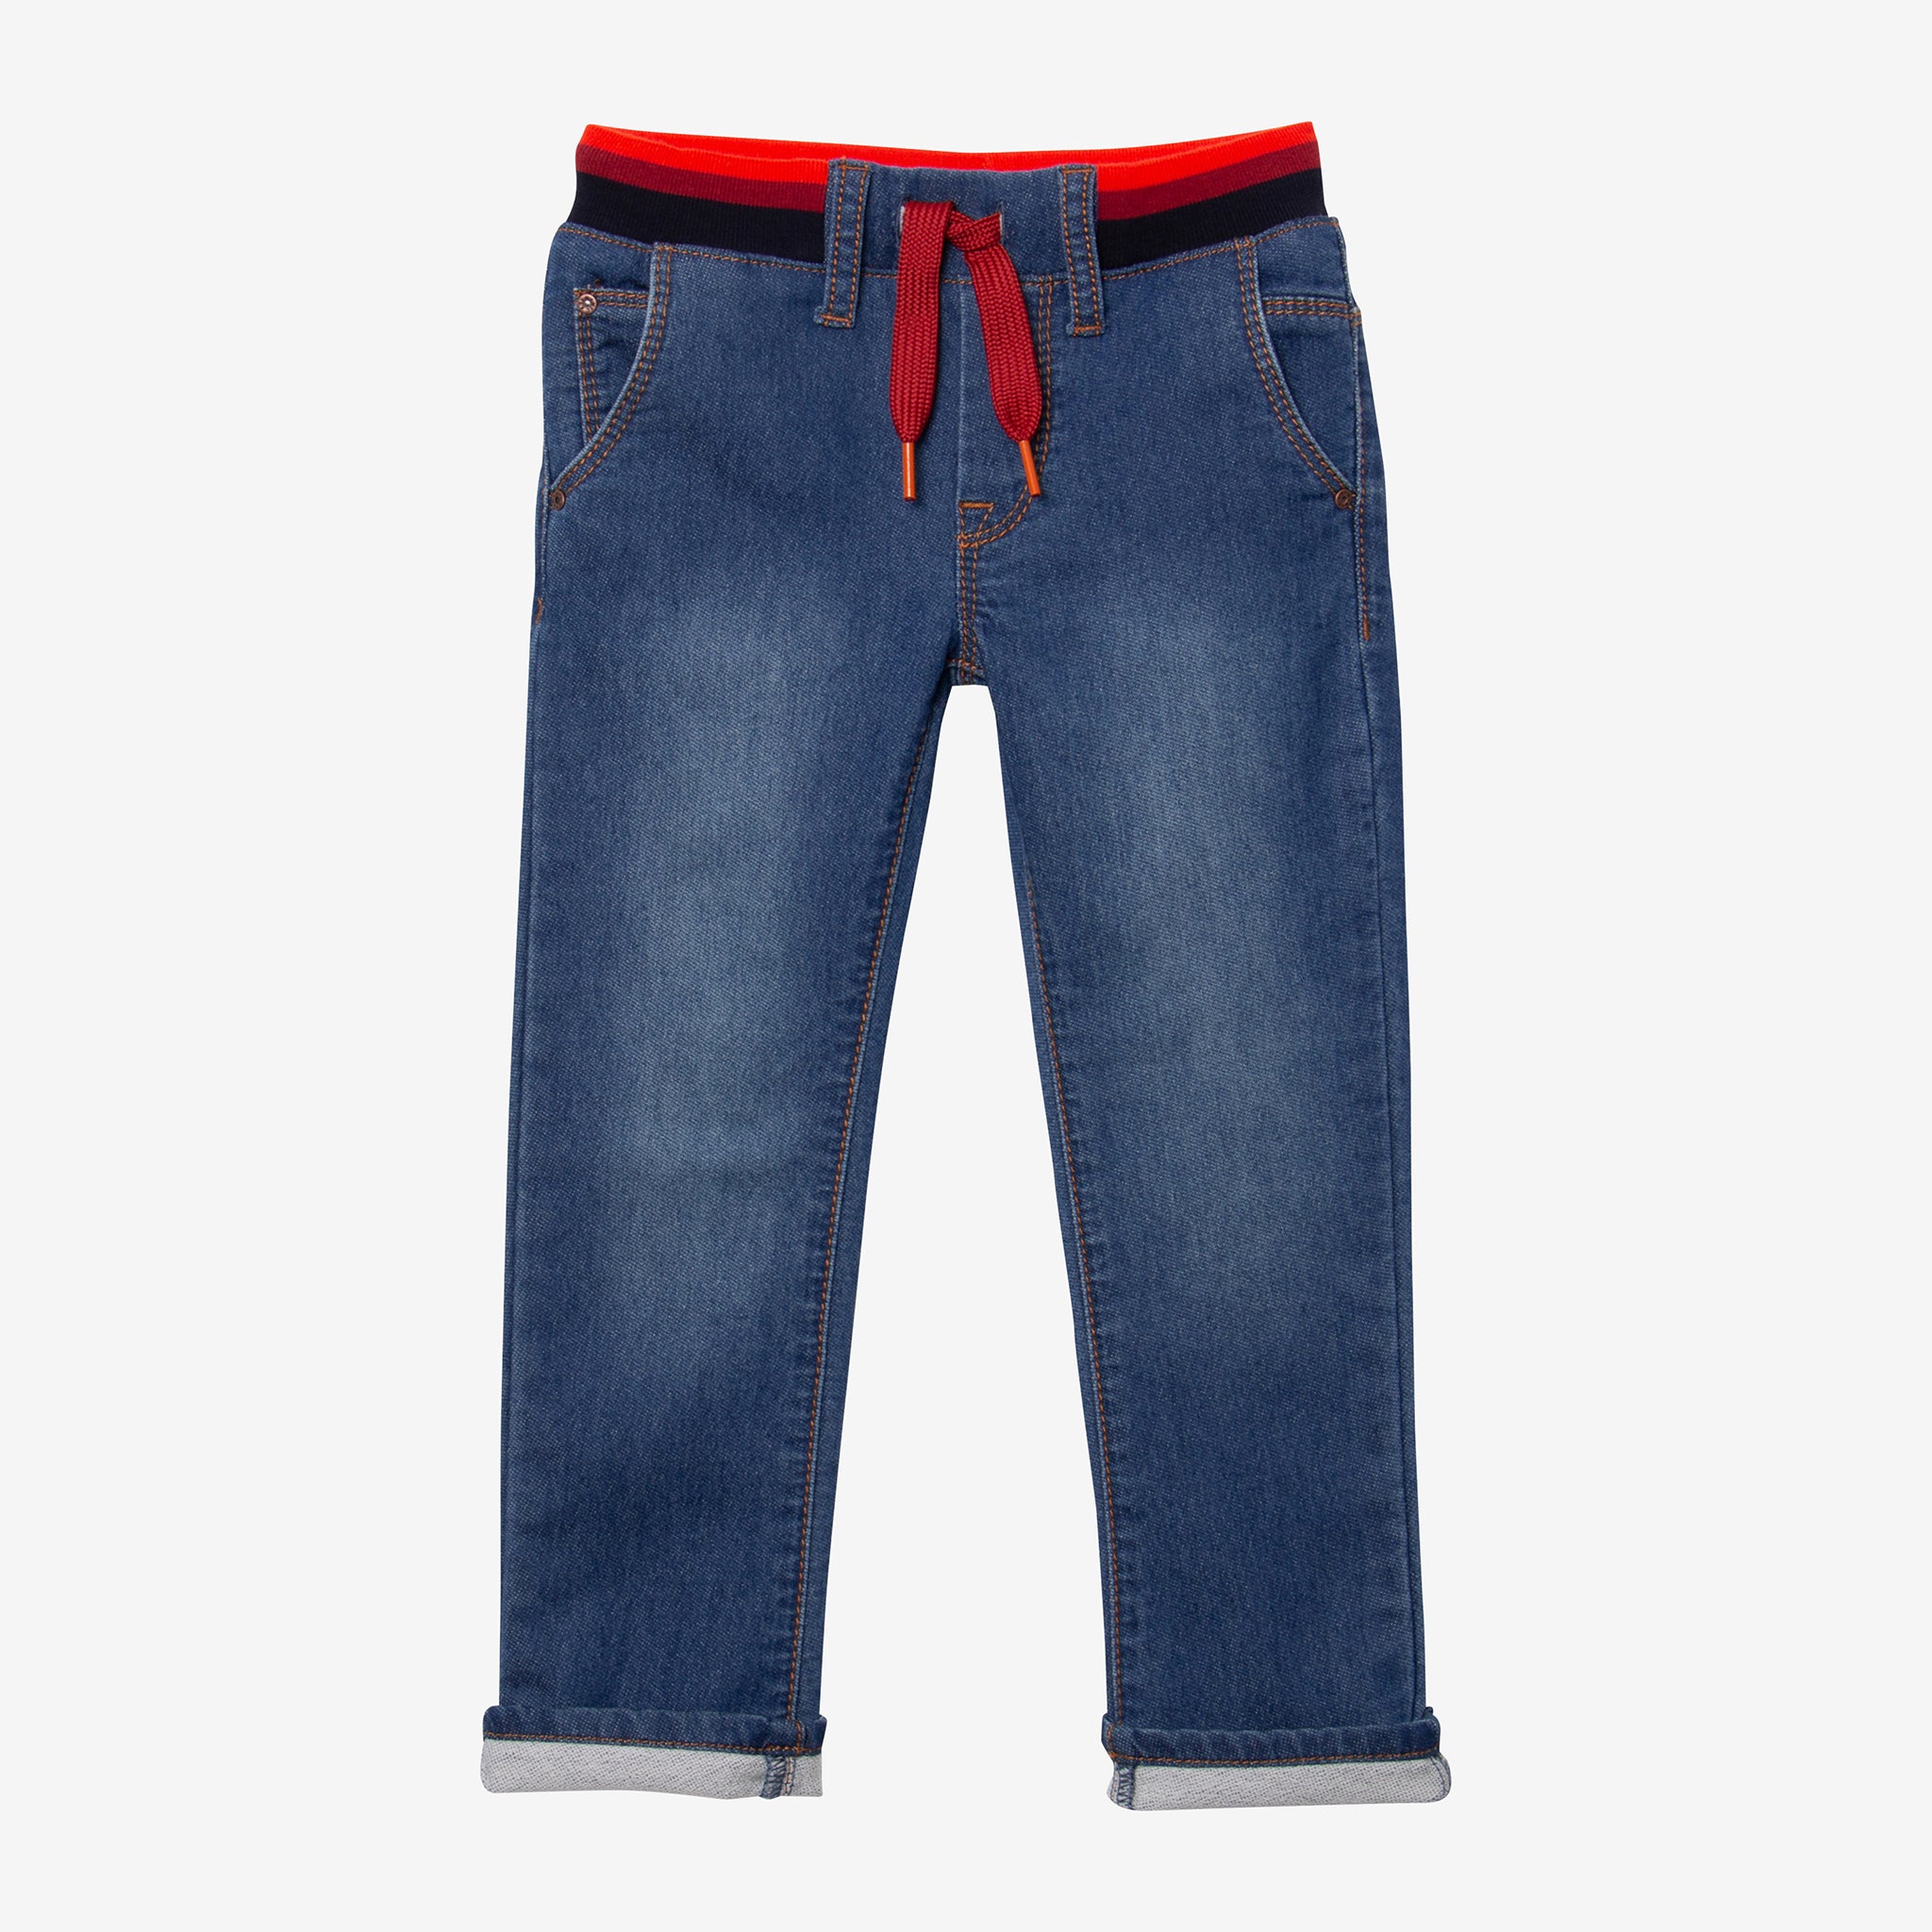 Lycra Cotton Jeans Boys Pant Set at Rs 260/piece in Mumbai | ID: 25347453648